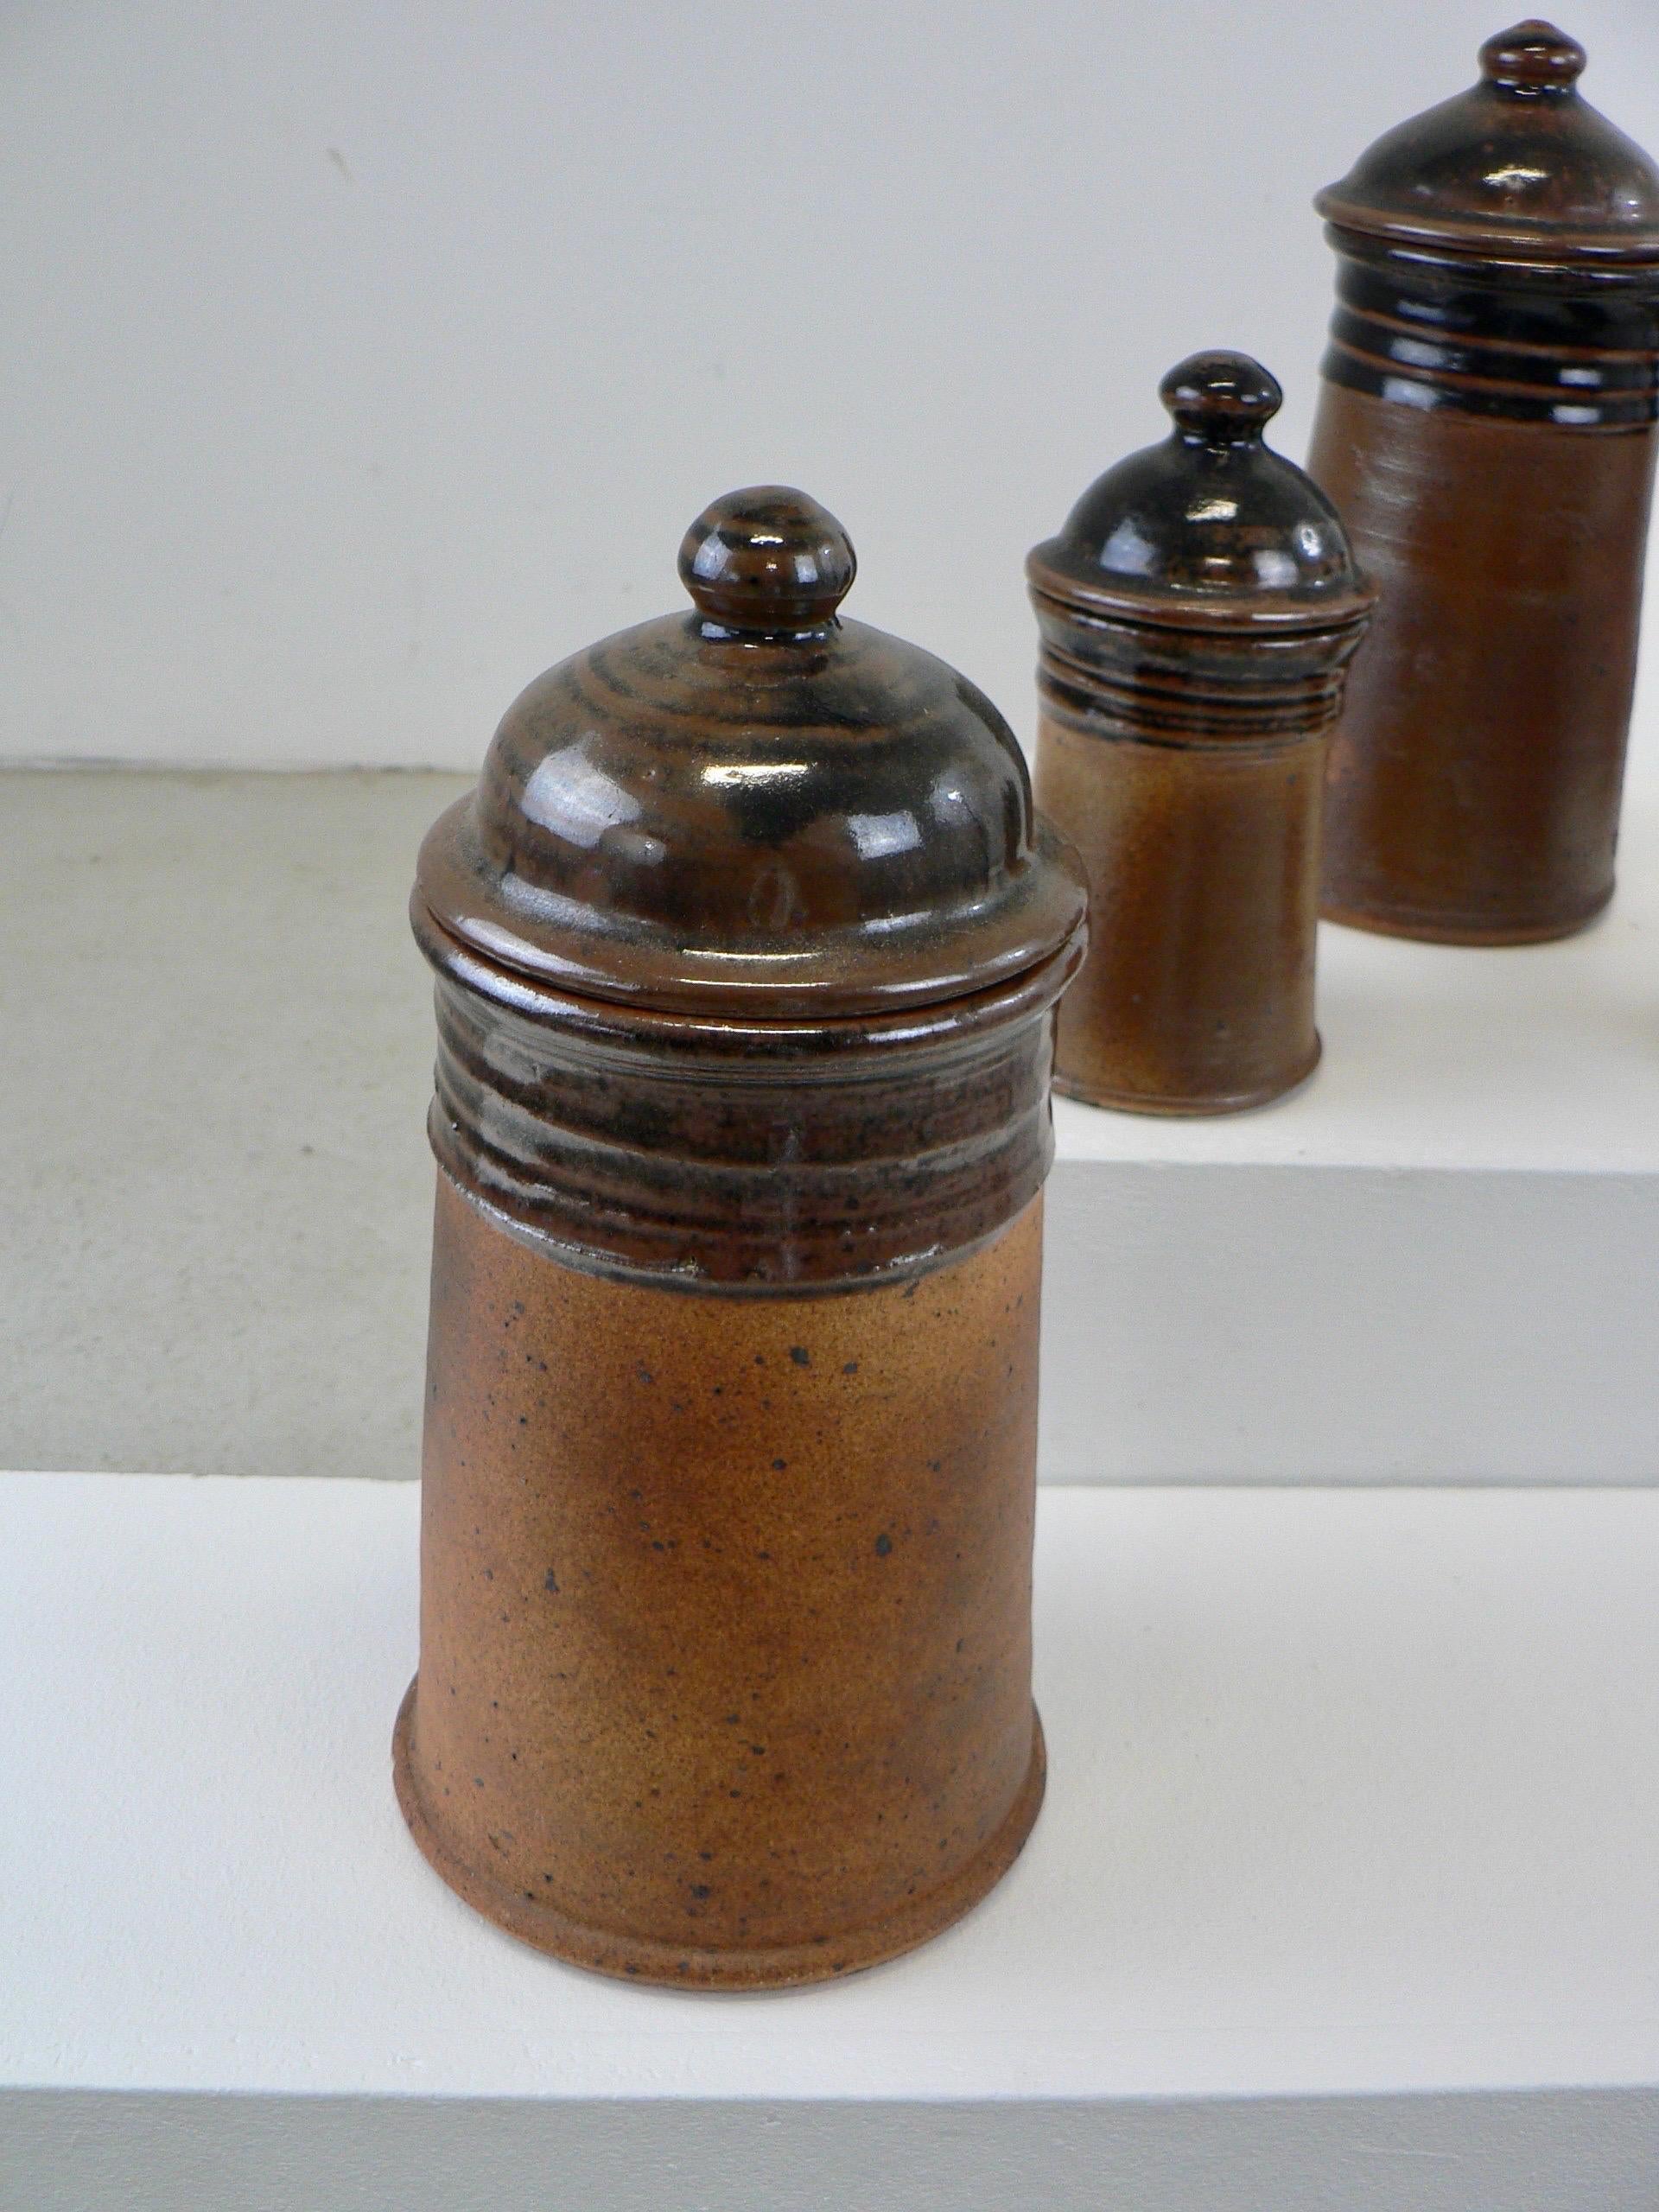 A set of five spice jars with their lids, crafted by Pierre Digan and Jeanette Stedman in their workshop in La Borne, France, in 1970.

Sizes:
Height: 24, 22, 16 and 15 cm.
Diameter: 12, 11 and 8 cm.
